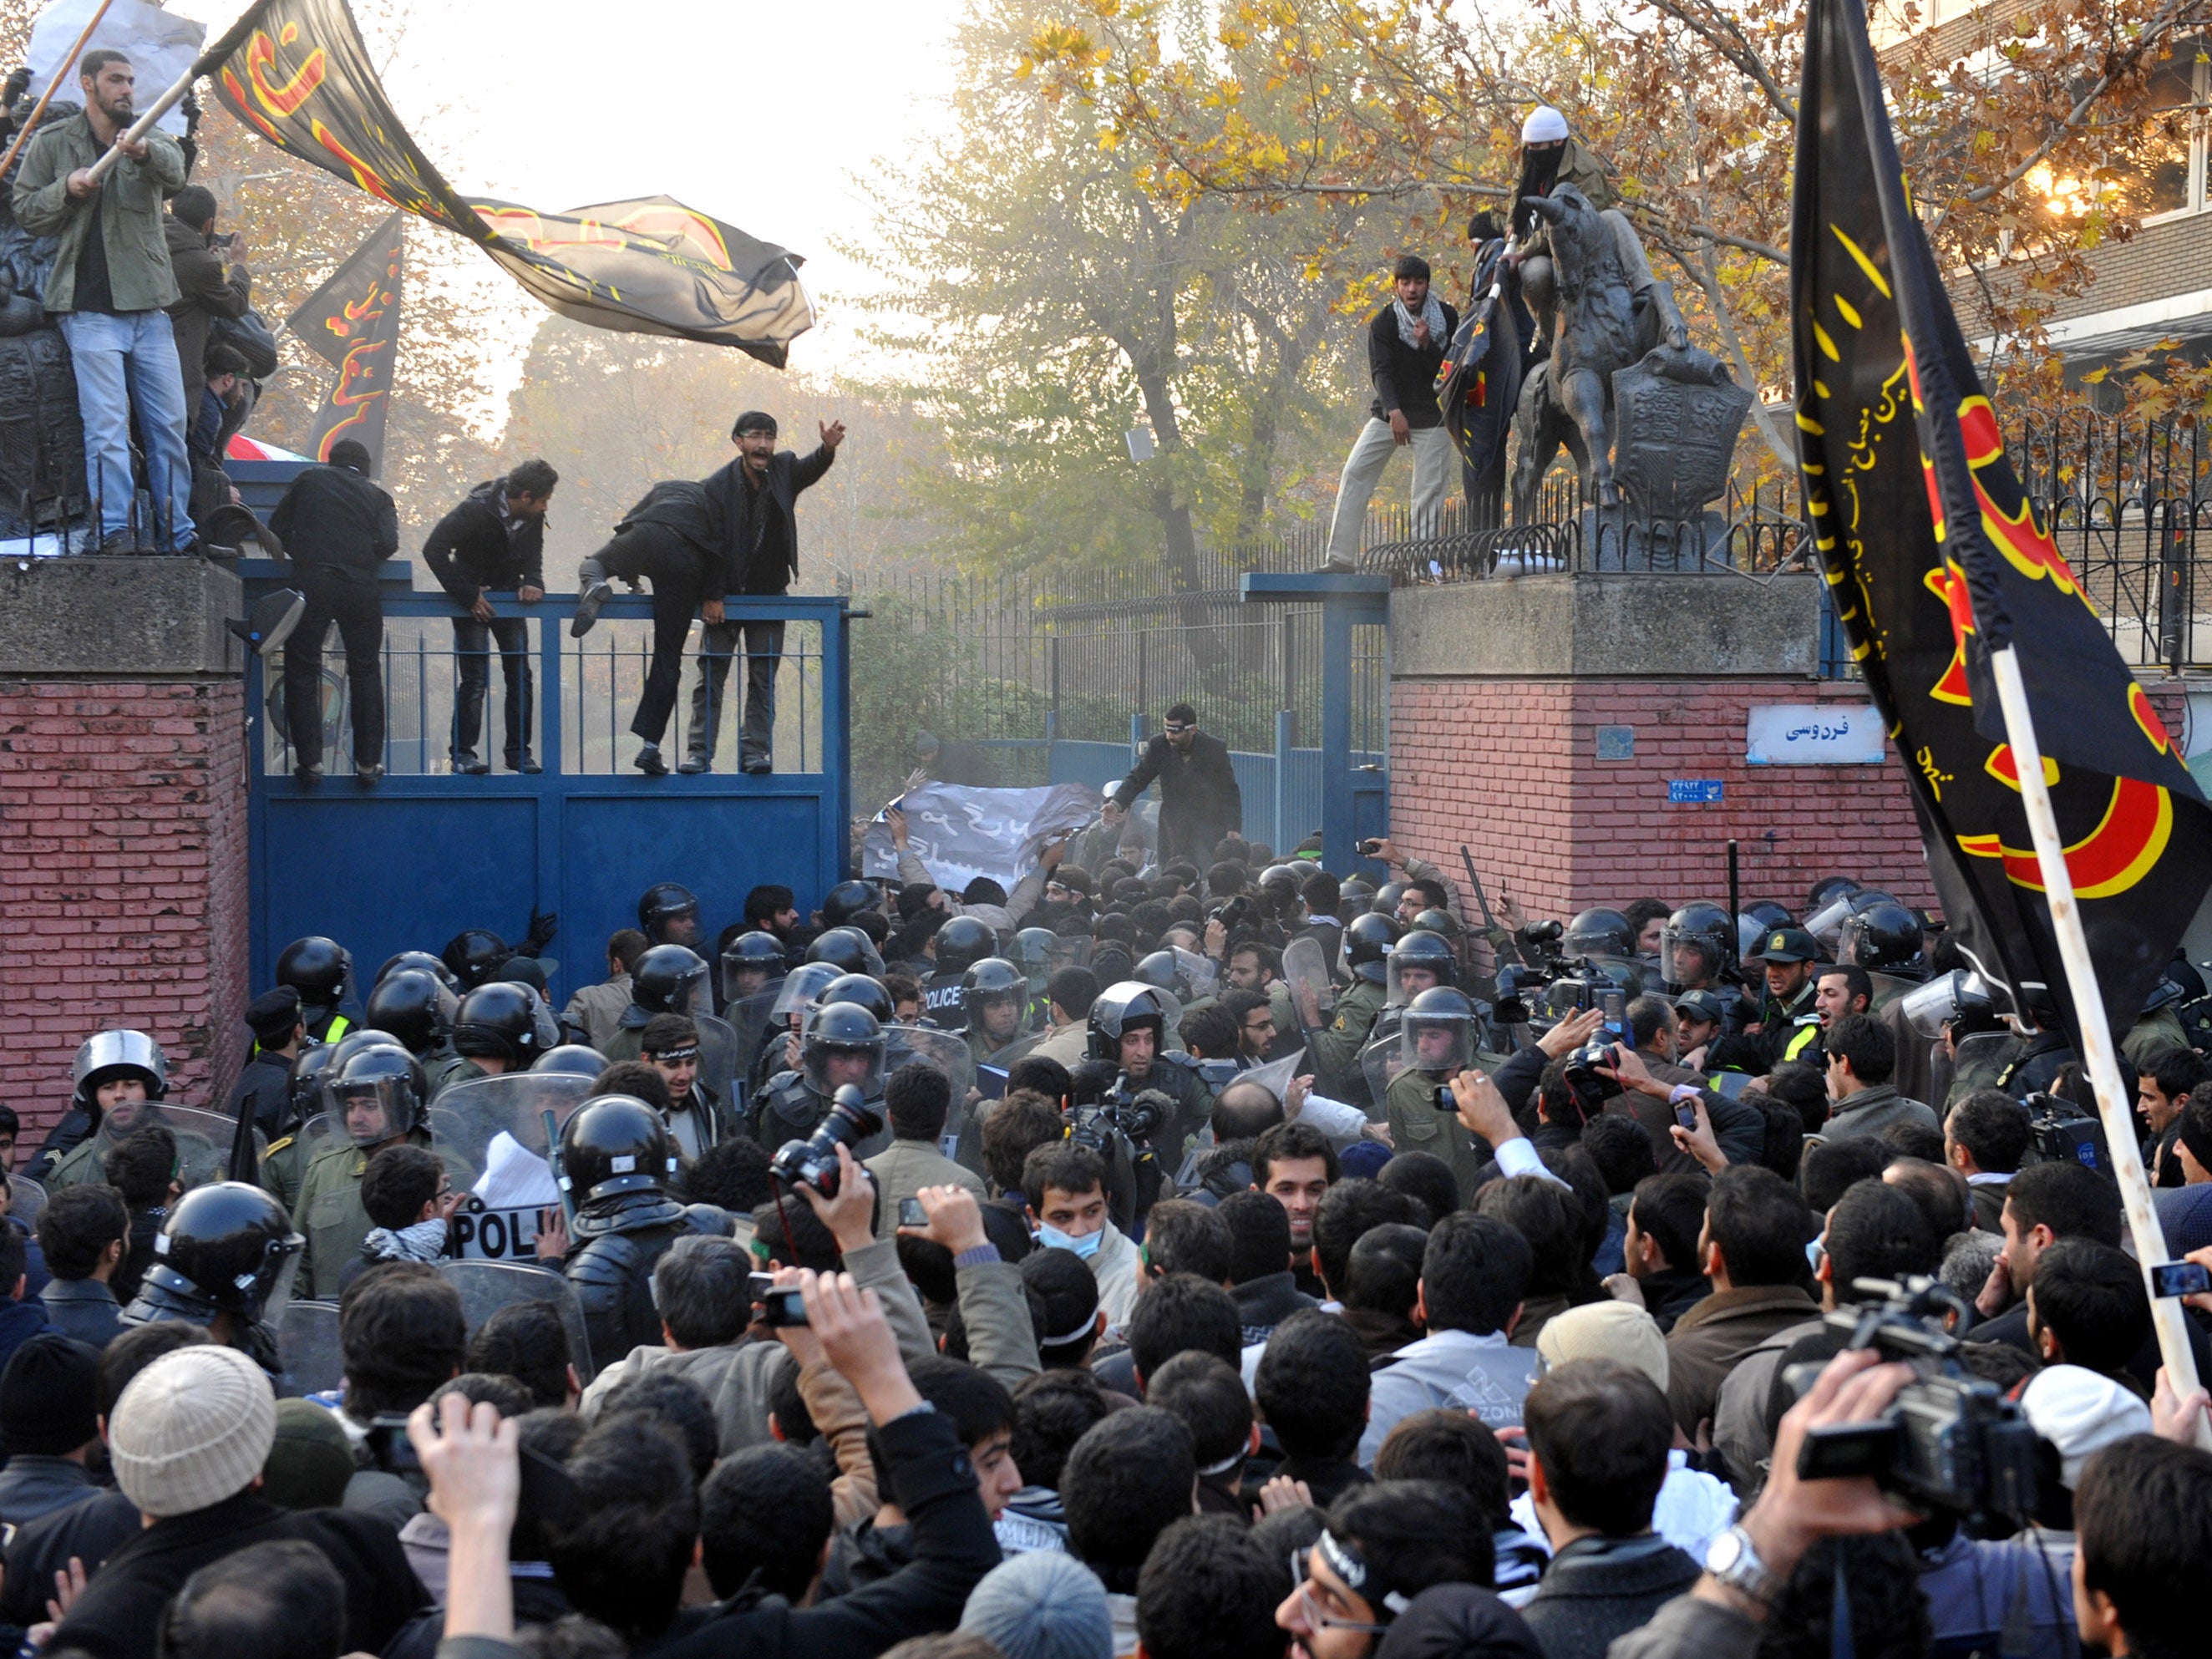 Protesters storming the British Embassy in Tehran in November 2011